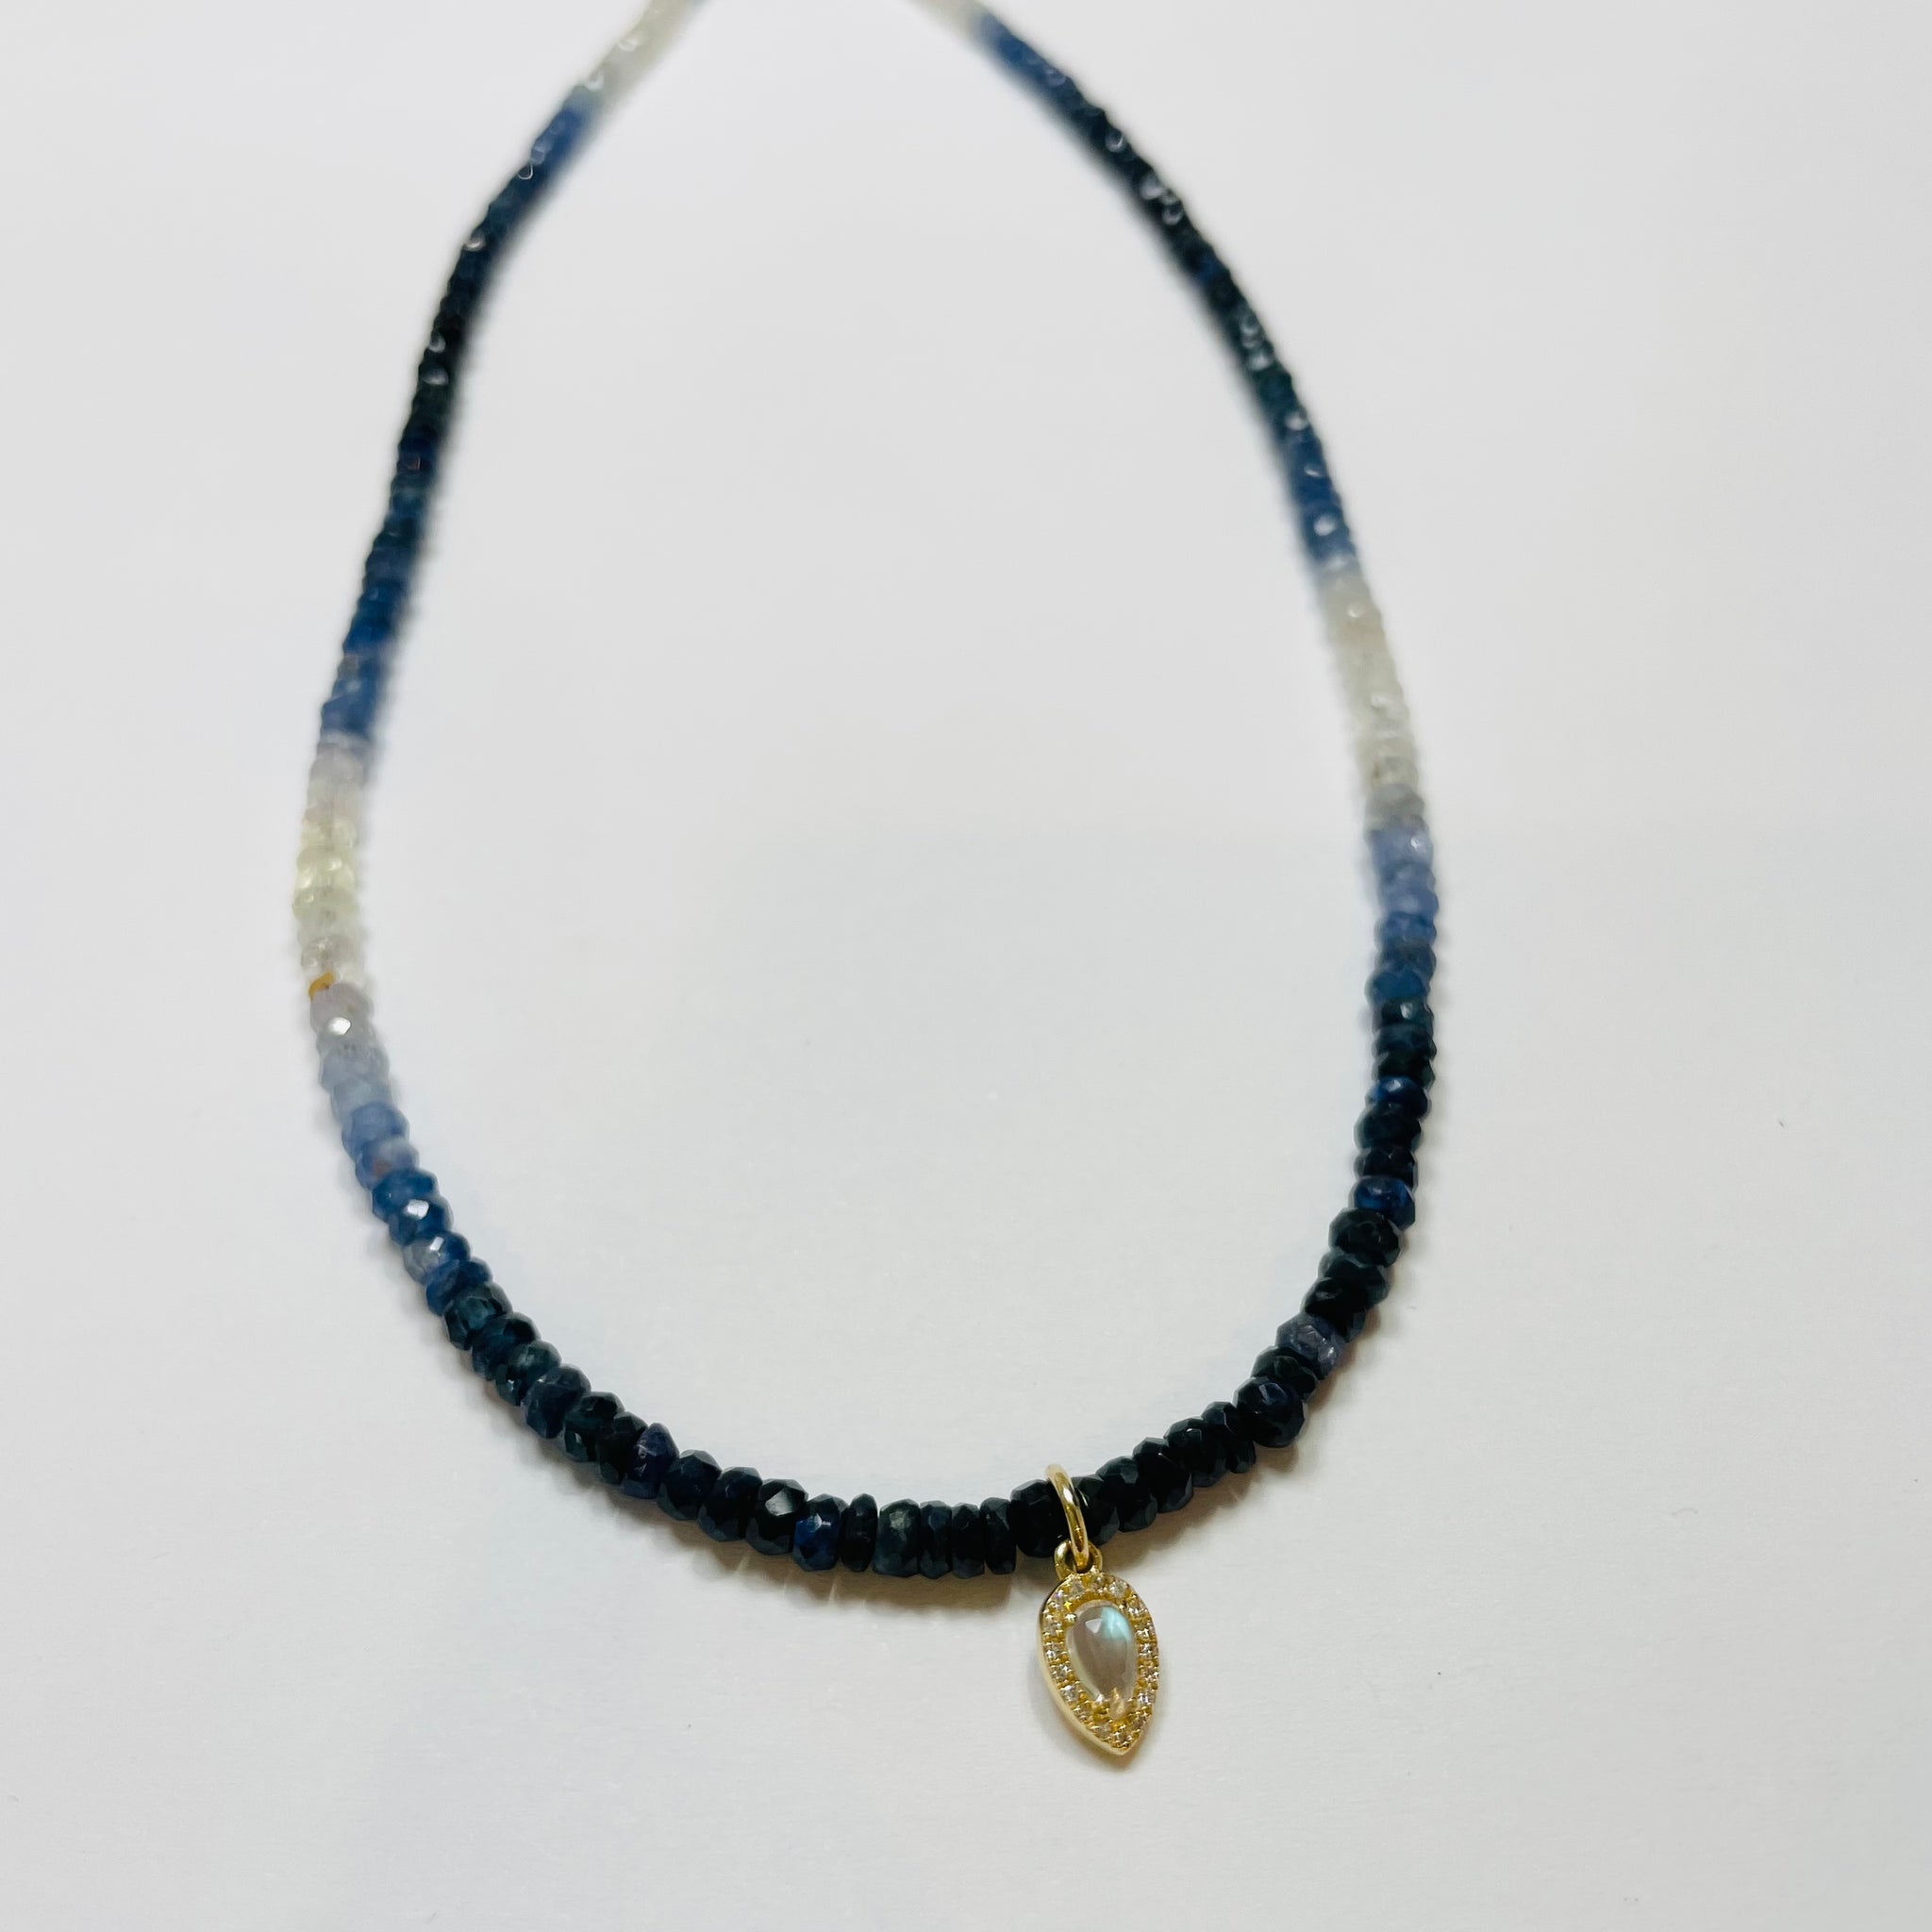 delicate shaded blue sapphire necklace with diamond moonstone charm